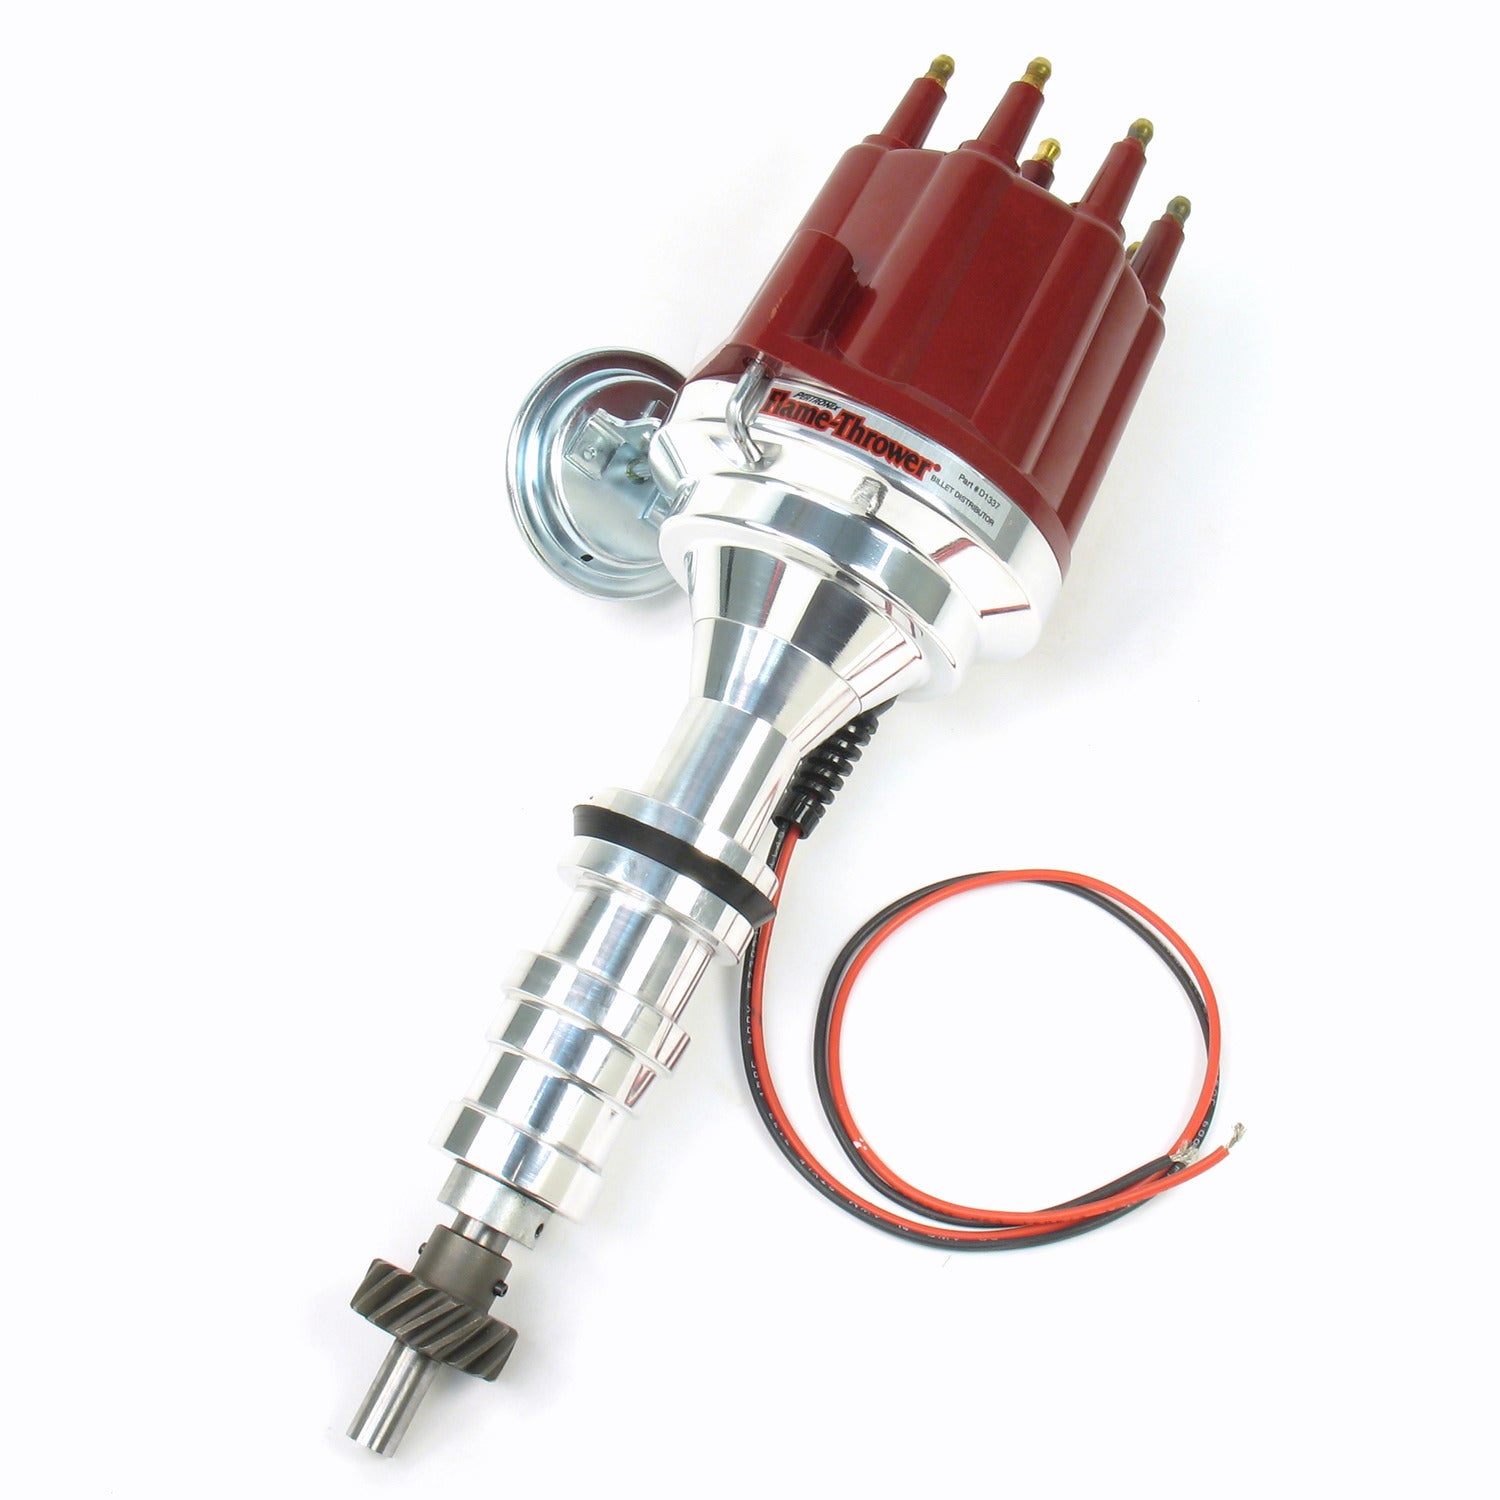 PerTronix D7133711 Flame-Thrower Electronic Distributor Billet Ford FE 352-428 with Ignitor III Vacuum Advance Red Male Cap